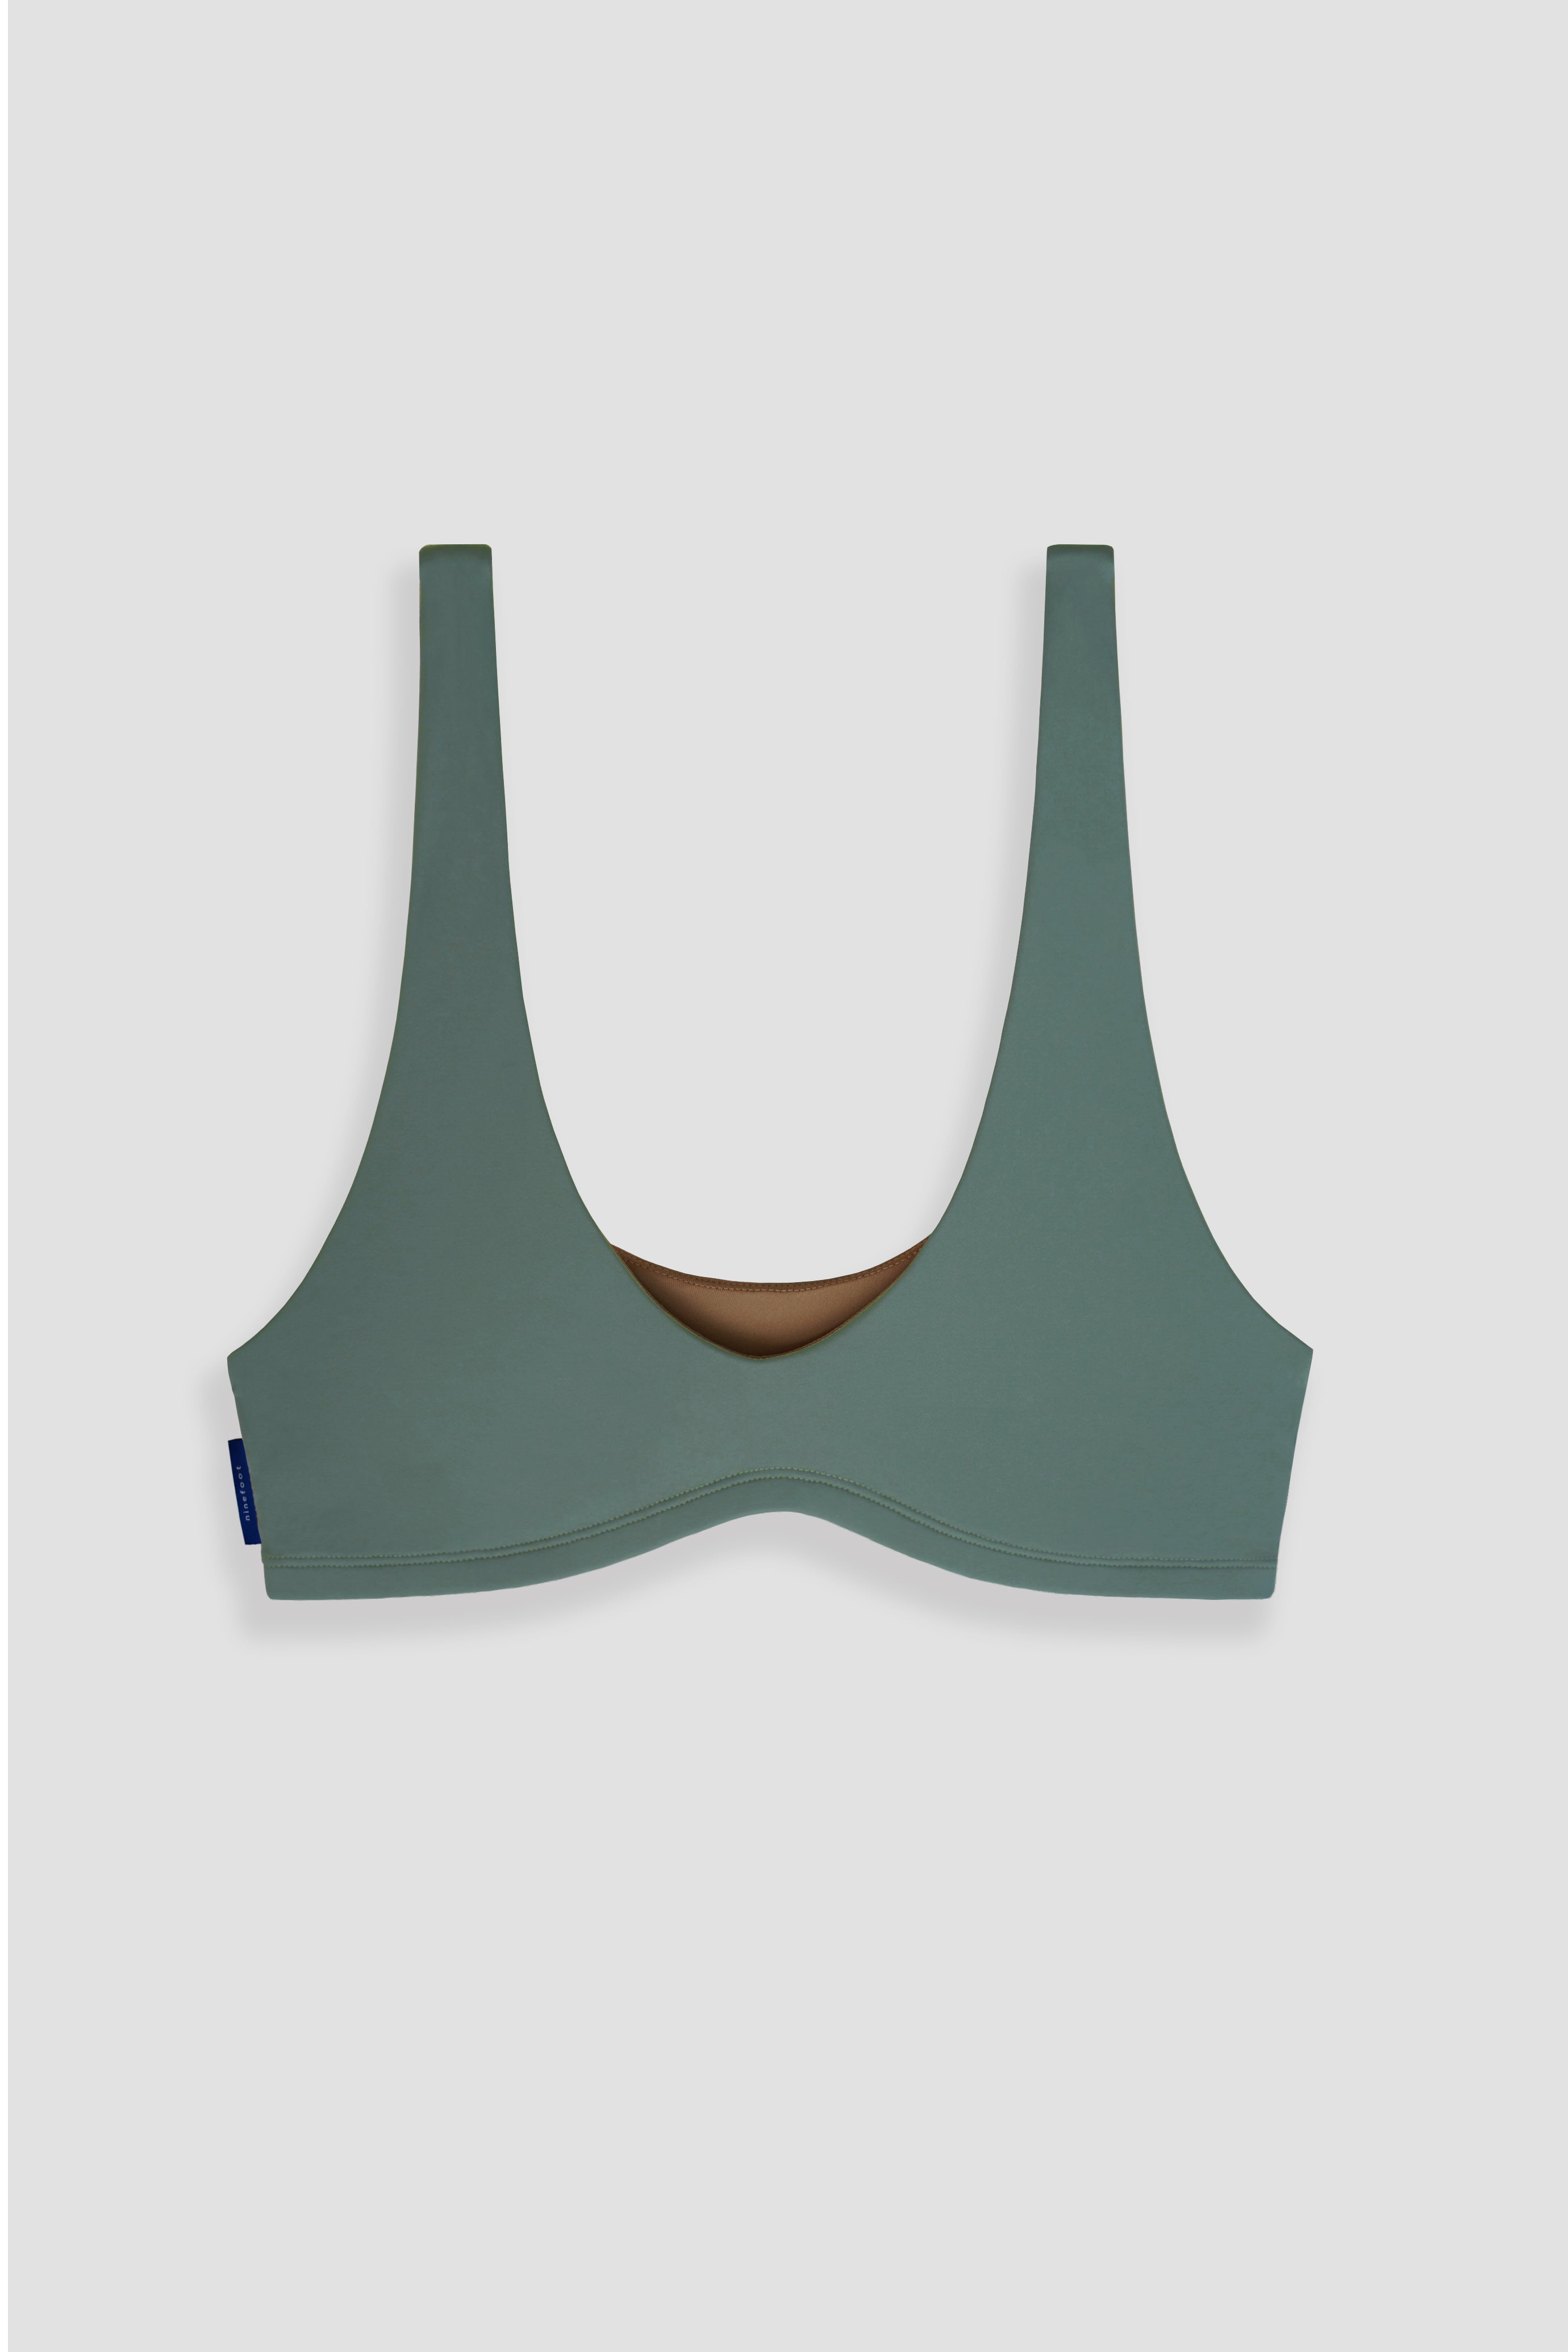 nias surf top in army green color flat image front side